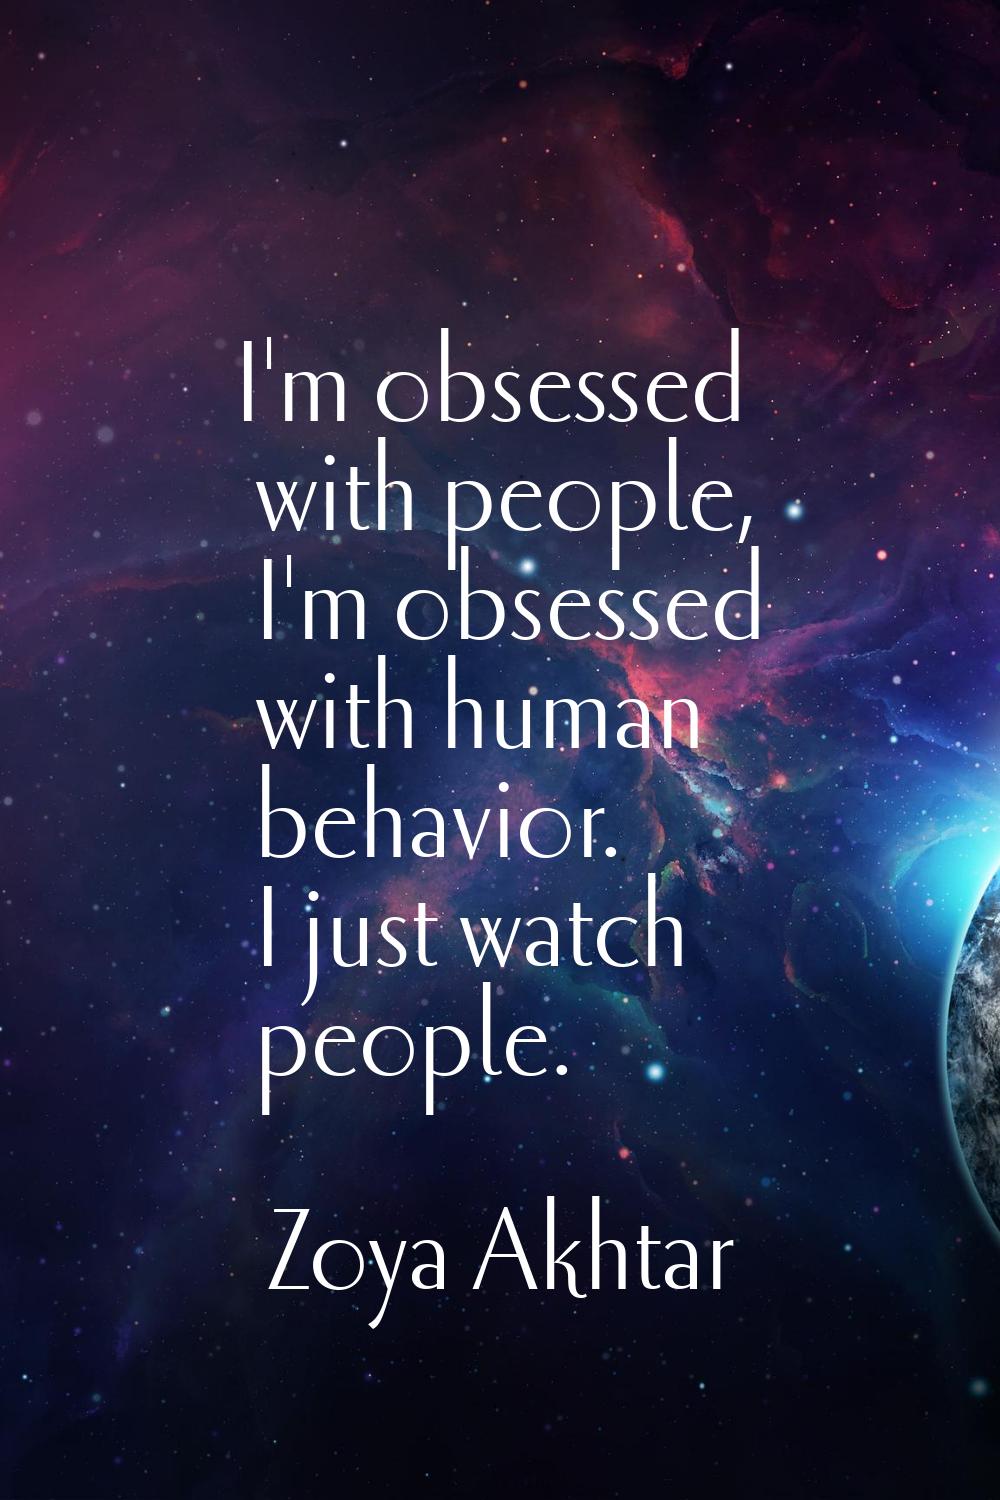 I'm obsessed with people, I'm obsessed with human behavior. I just watch people.